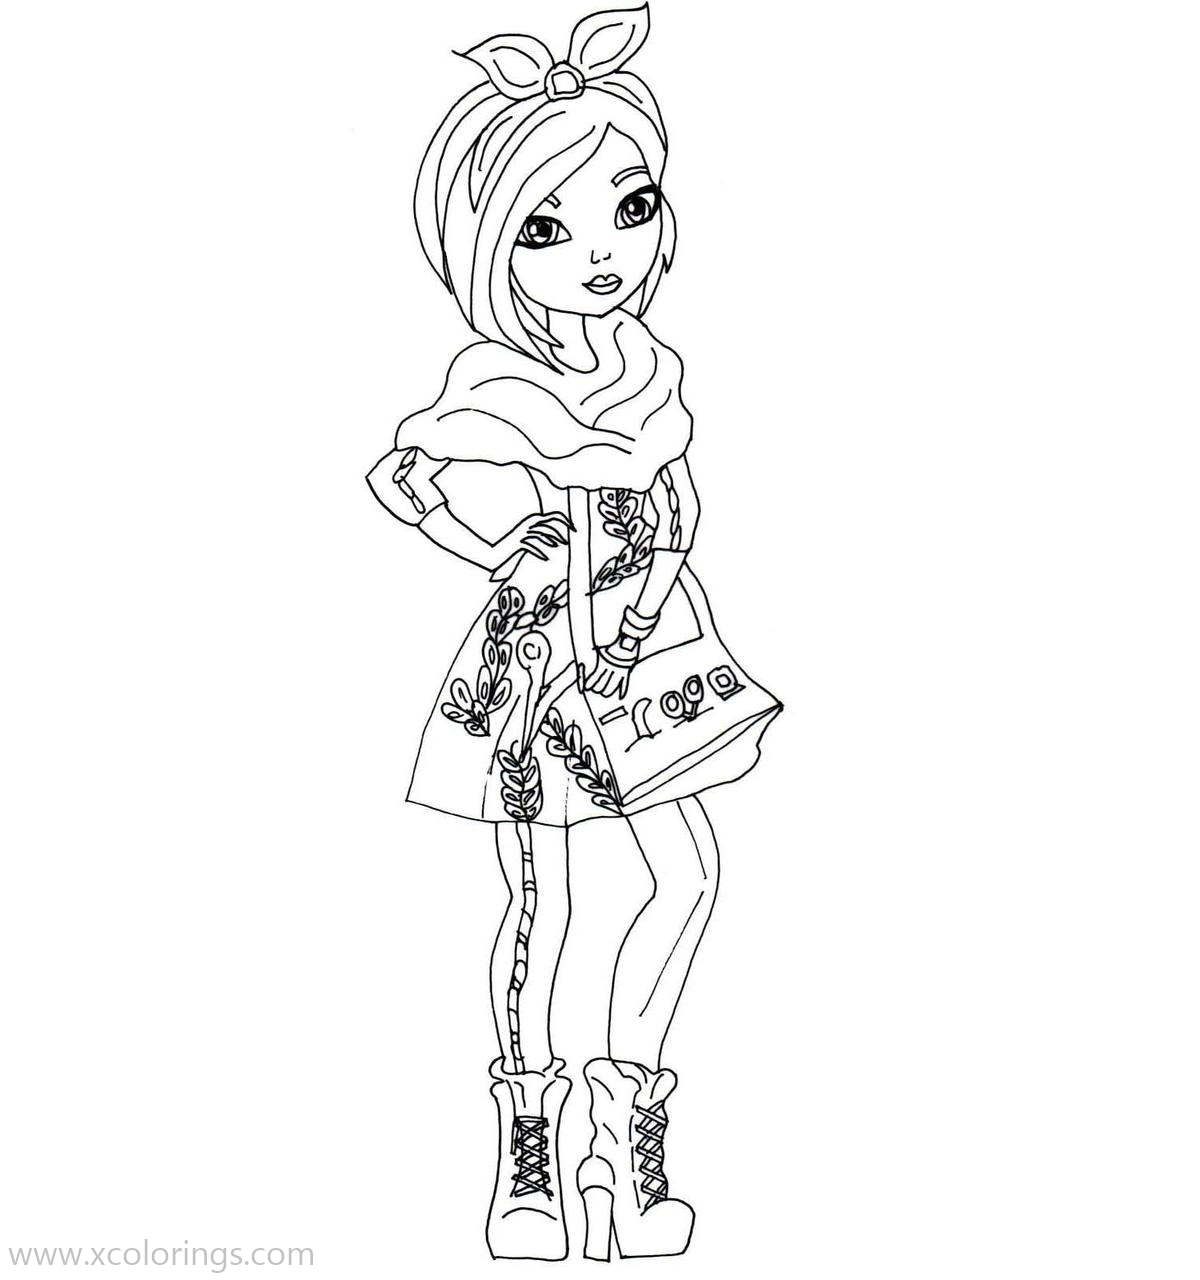 Free Ever After High Short Hair Girl Coloring Pages printable